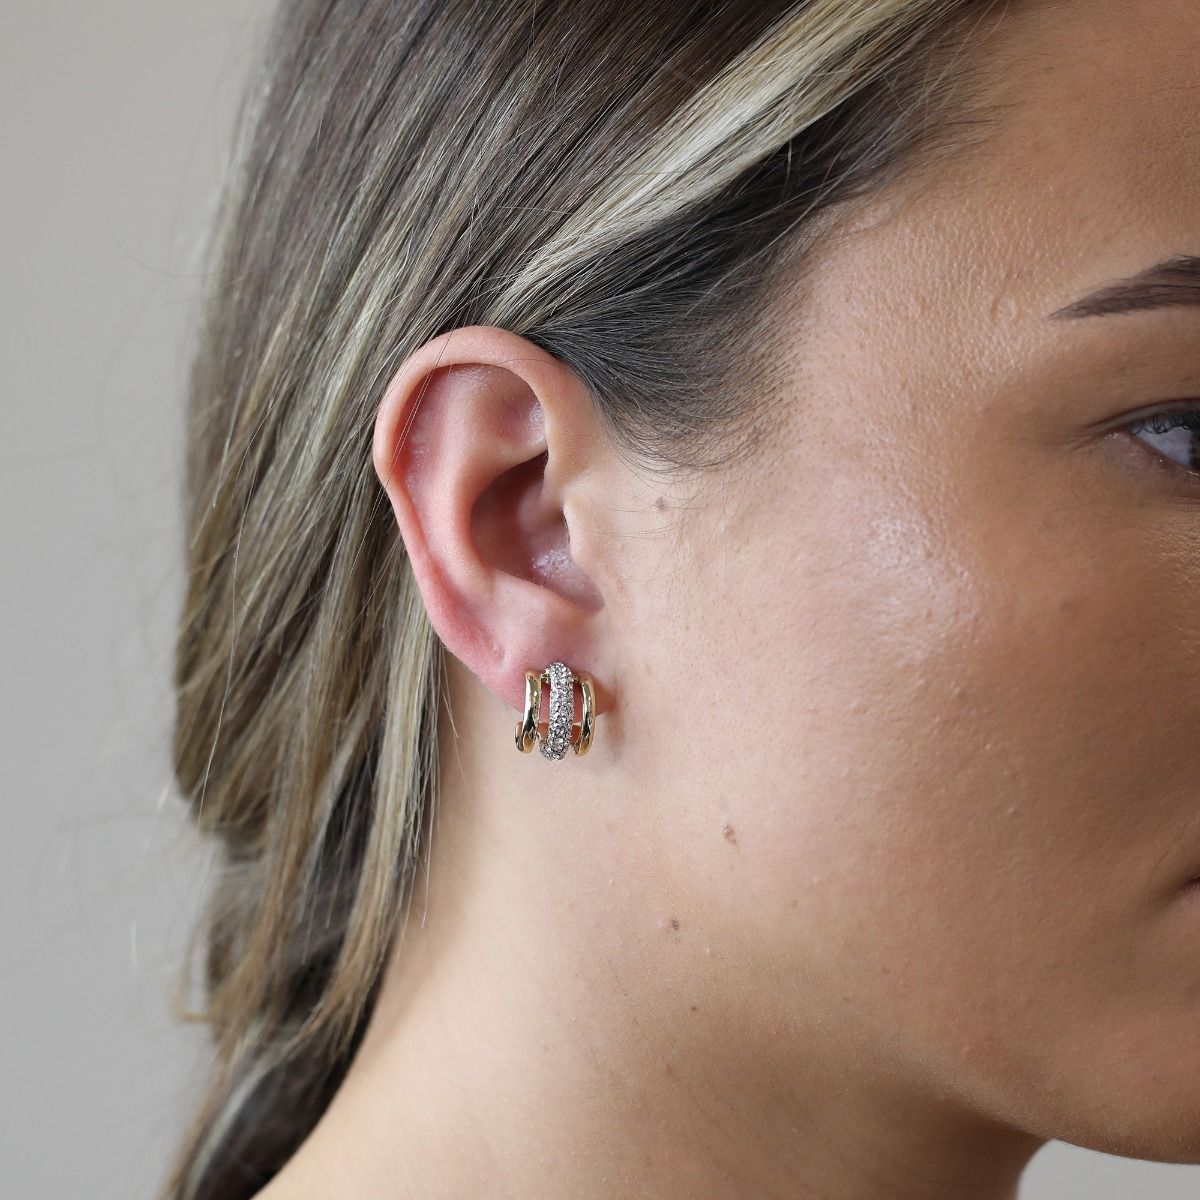 These beautiful half hoop earrings from the Aspire collection will add sophistication to any outfit. Featuring shimmering pave set crystals set into rhodium plating, wrapped between two bands of polished gold